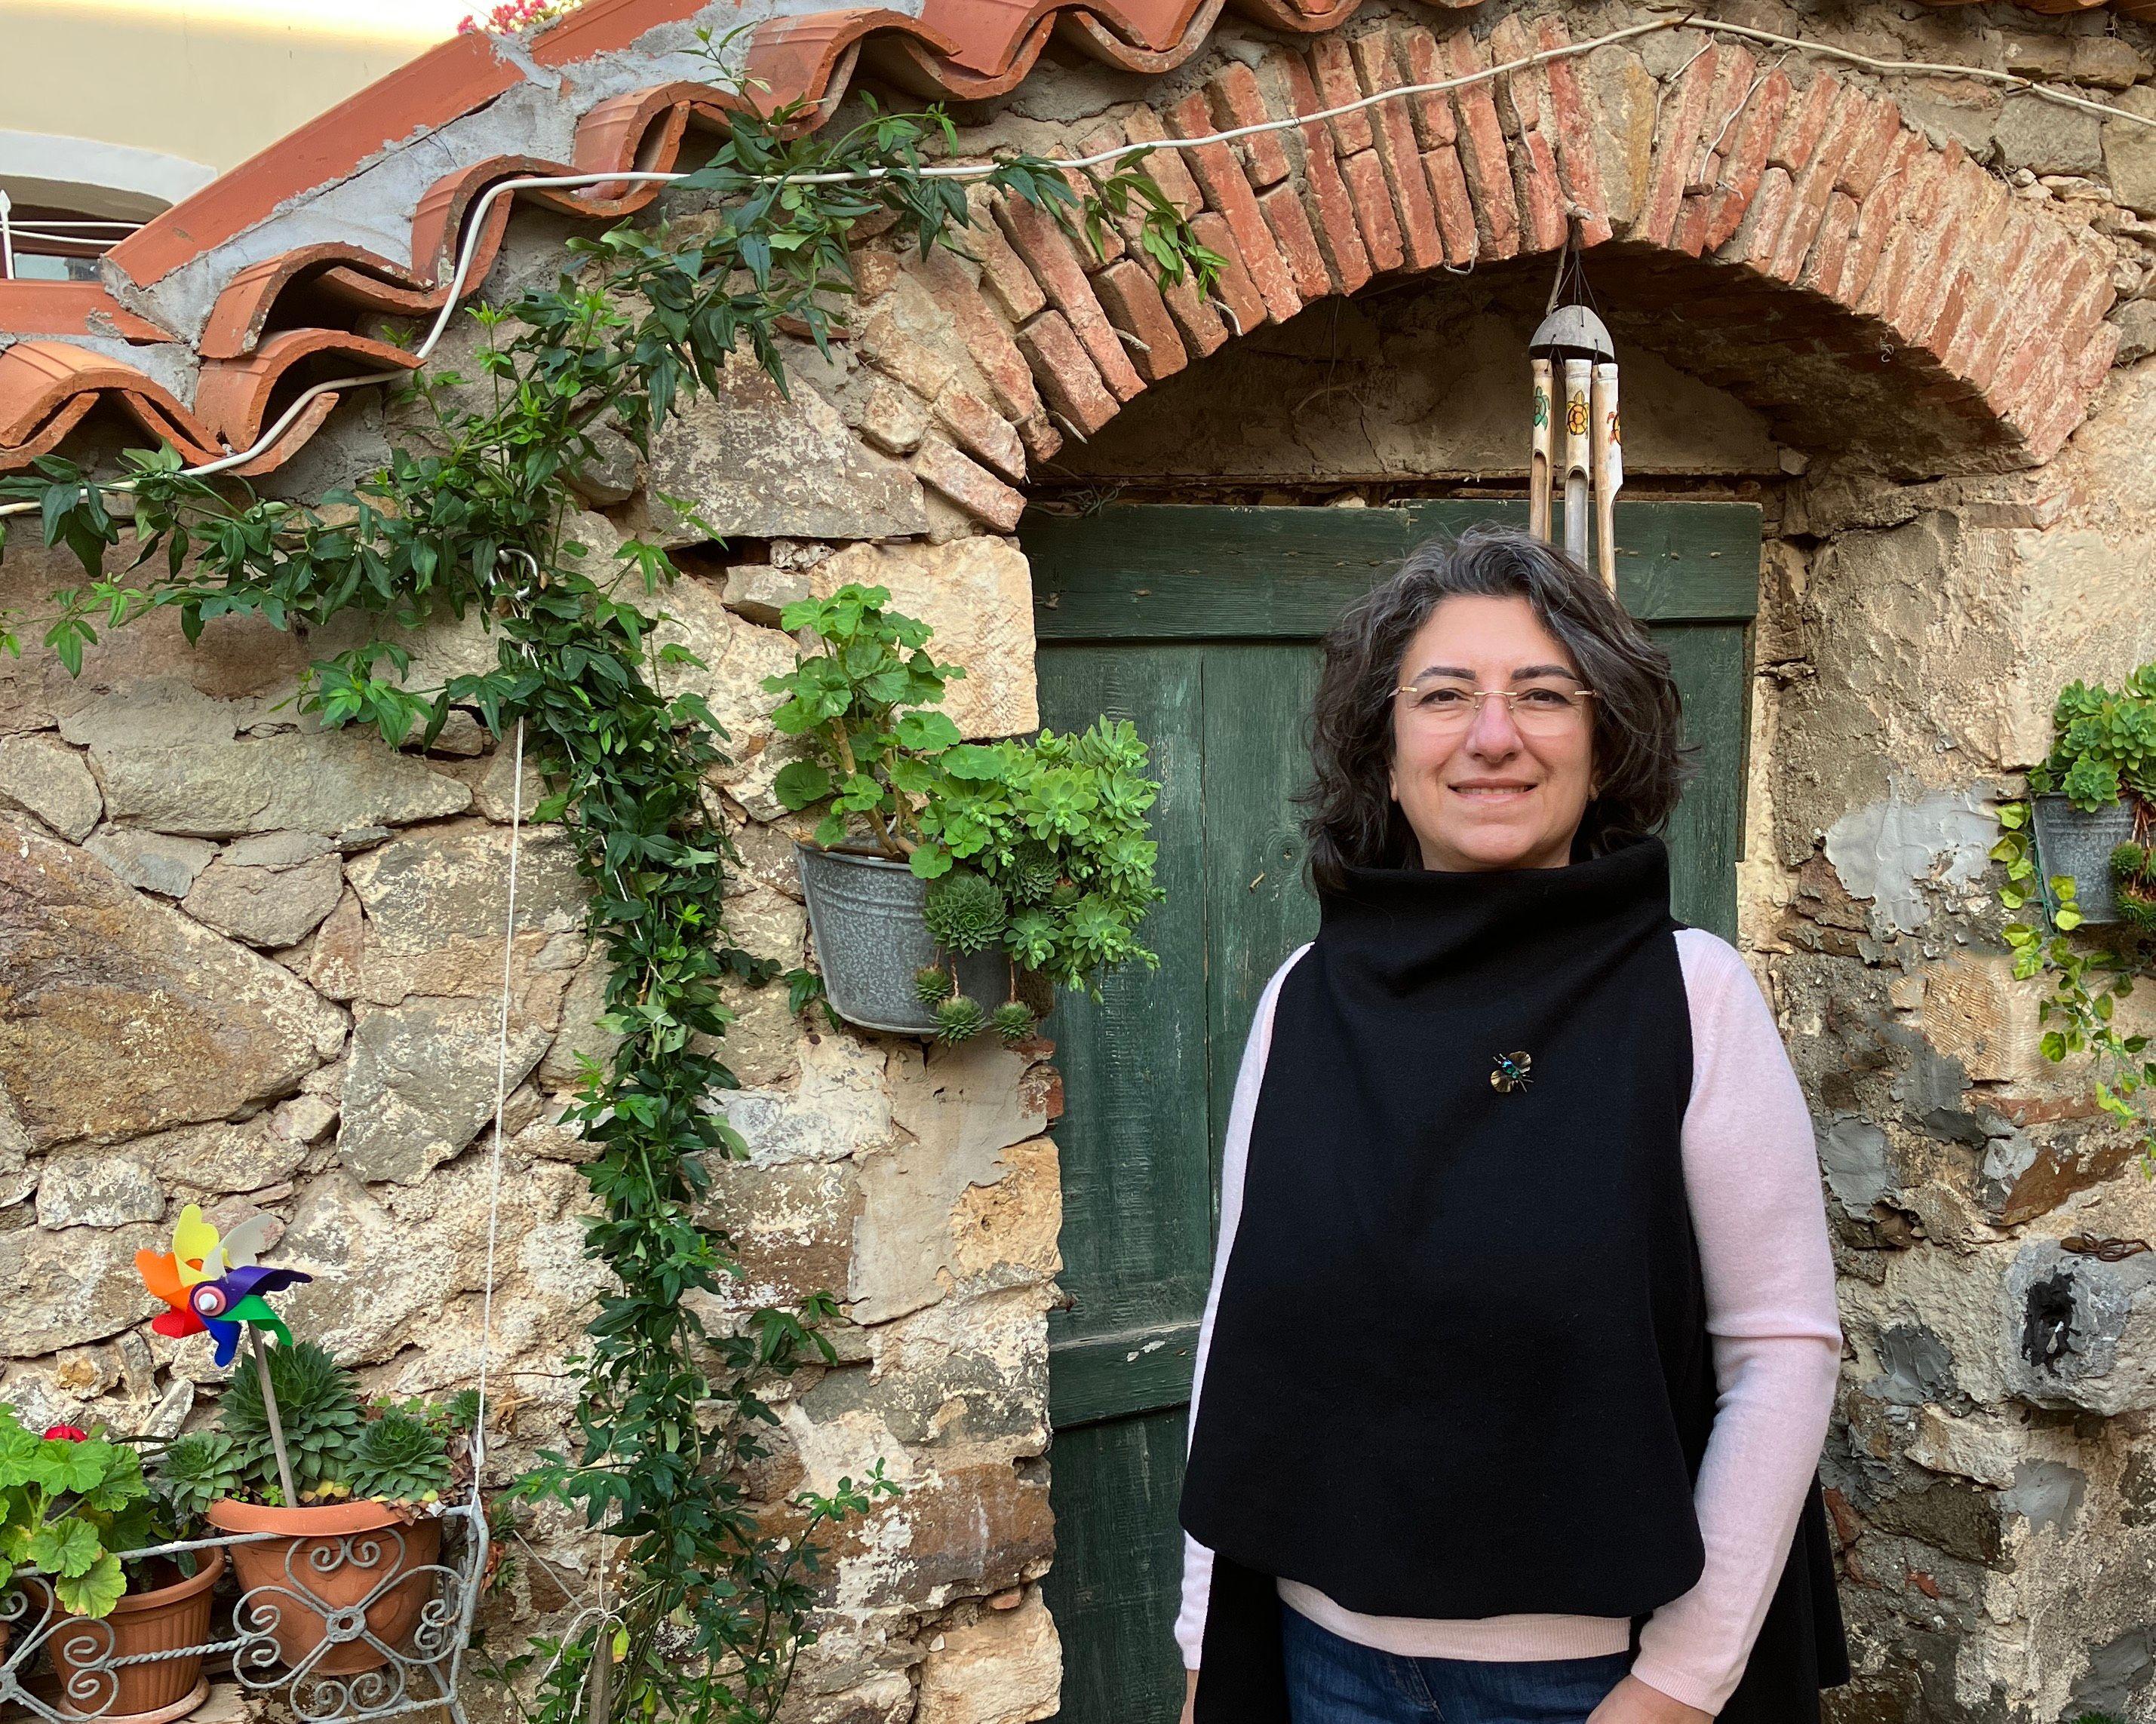 Ümit Hamlacıbaşı is standing in front of  a structure made of big stones. It looks like a wall. In the wall there is a green door and a wind chime. Ümit is smiling into the camera, is waering glasses and has long black hair.